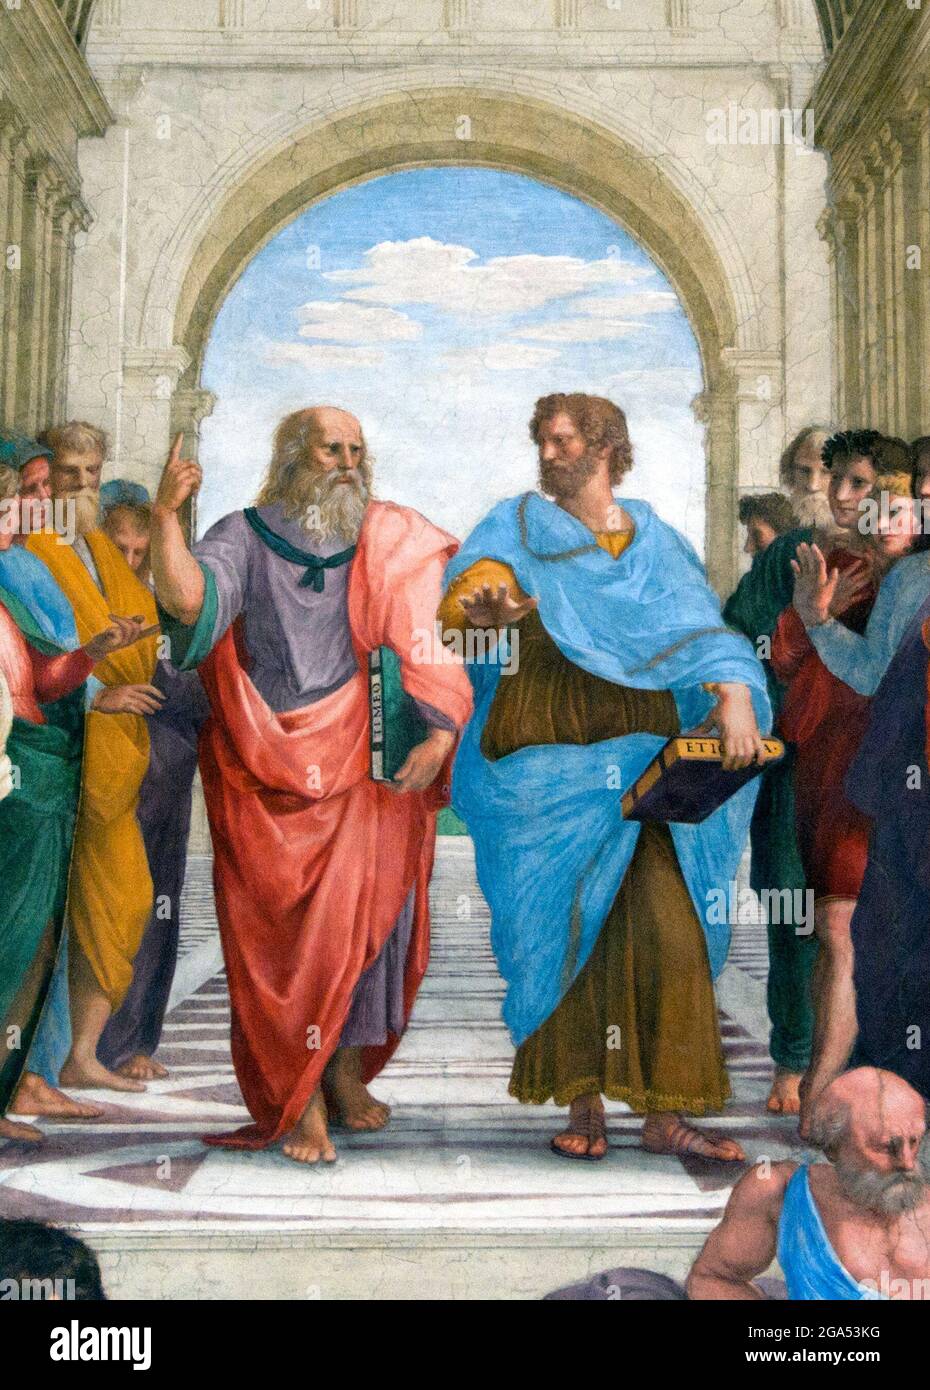 Italy: Central detail from 'The School of Athens', featuring Greek philosophers Plato (red robe) and Aristotle (blue robe). Raphael (1483 - 1520), painted between 1509–1511 (Apostolic Palace, Vatican City).  'The School of Athens', or Scuola di Atene in Italian, is one of the most famous frescoes by the Italian Renaissance artist Raphael. It was painted between 1509 and 1511 as a part of Raphael's commission to decorate with frescoes the rooms now known as the Stanze di Raffaello, in the Apostolic Palace in the Vatican. Stock Photo